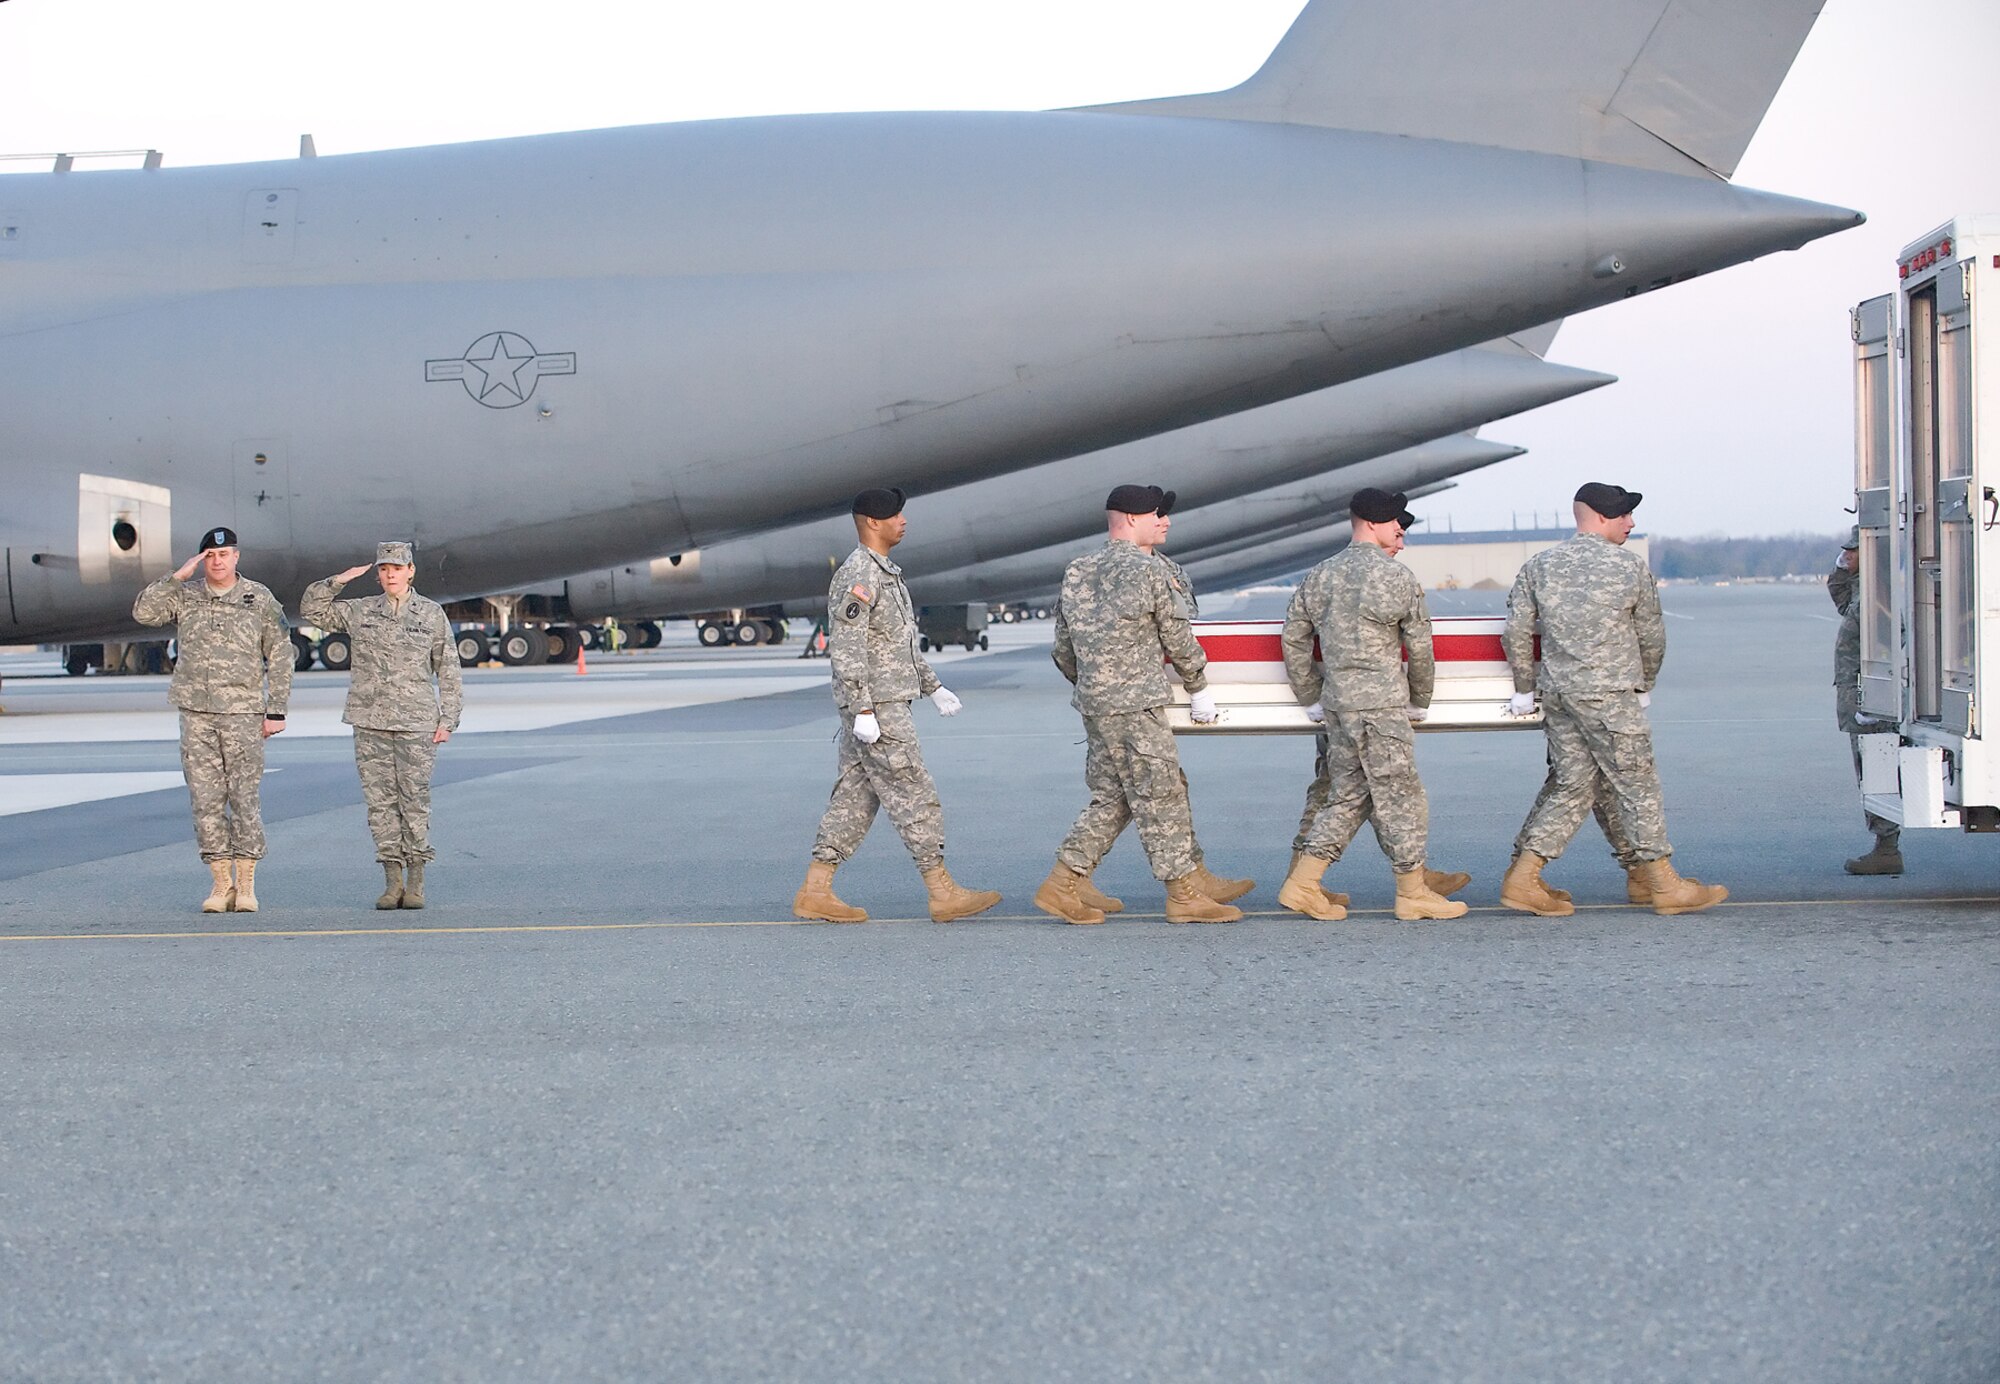 A U.S. Army carry team transfers the remains of Army Private 2nd Class Nicholas S. Cook of Hungry Horse, Mont., at Dover Air Force Base, Del., on March 9, 2010. PV2 Cook was assigned to the Company B, 2nd Battalion, 503d Infantry at Camp Elderle in Italy. He died March 7 in Konar province, Afghanistan, of wounds sustained when insurgents attacked his unit using small arms fire. (U.S. Air Force photo/Brianne Zimny)